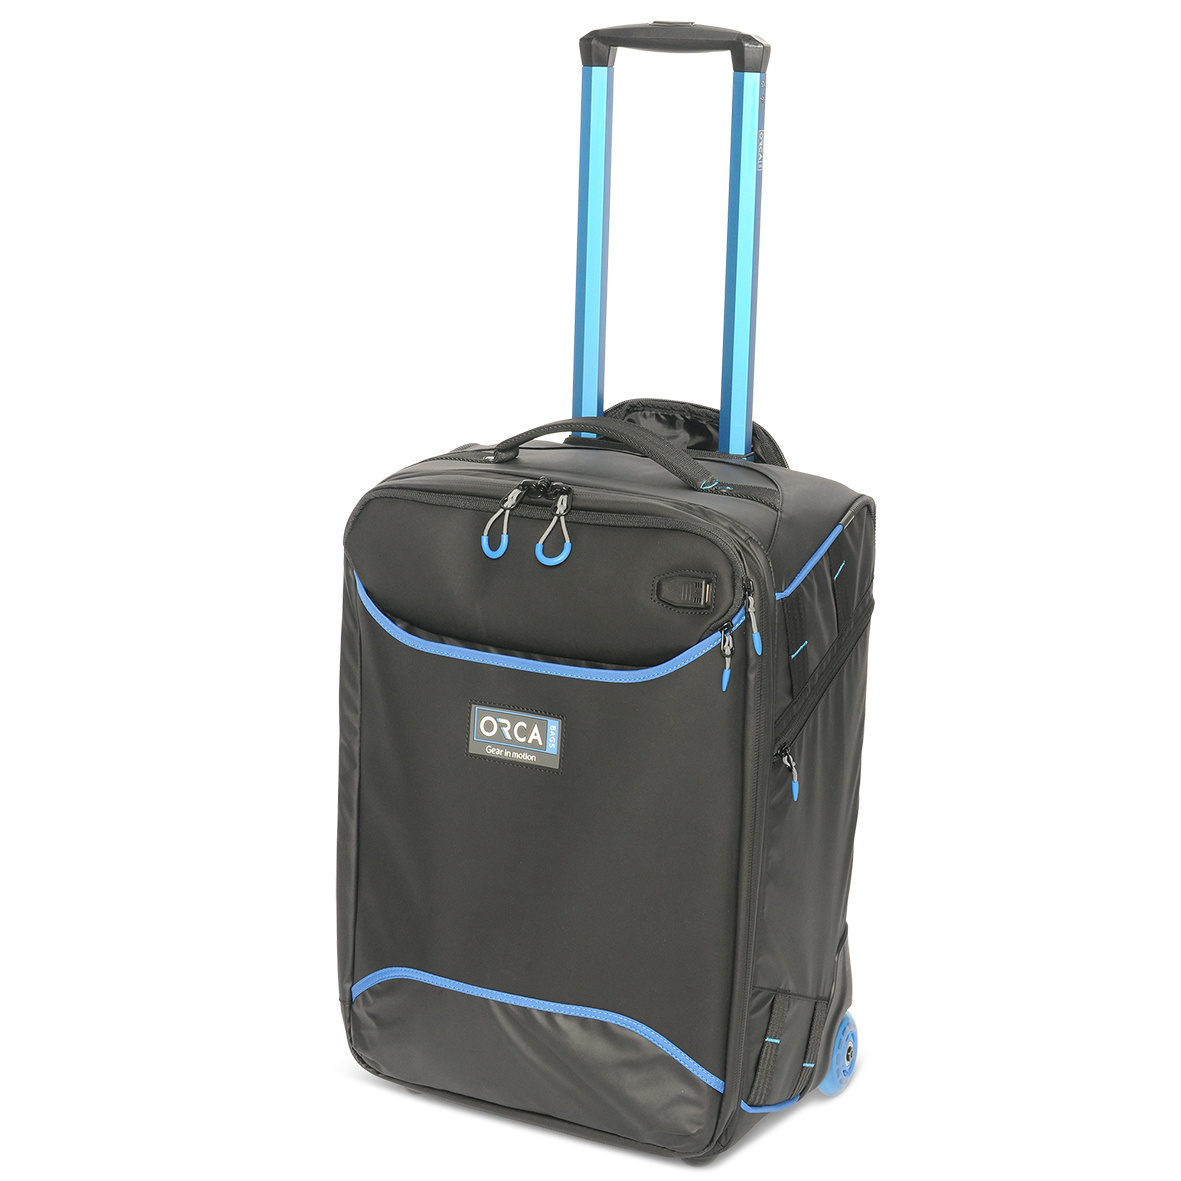 ORCA Video Camera Trolley Bag with Waterproof Zippers